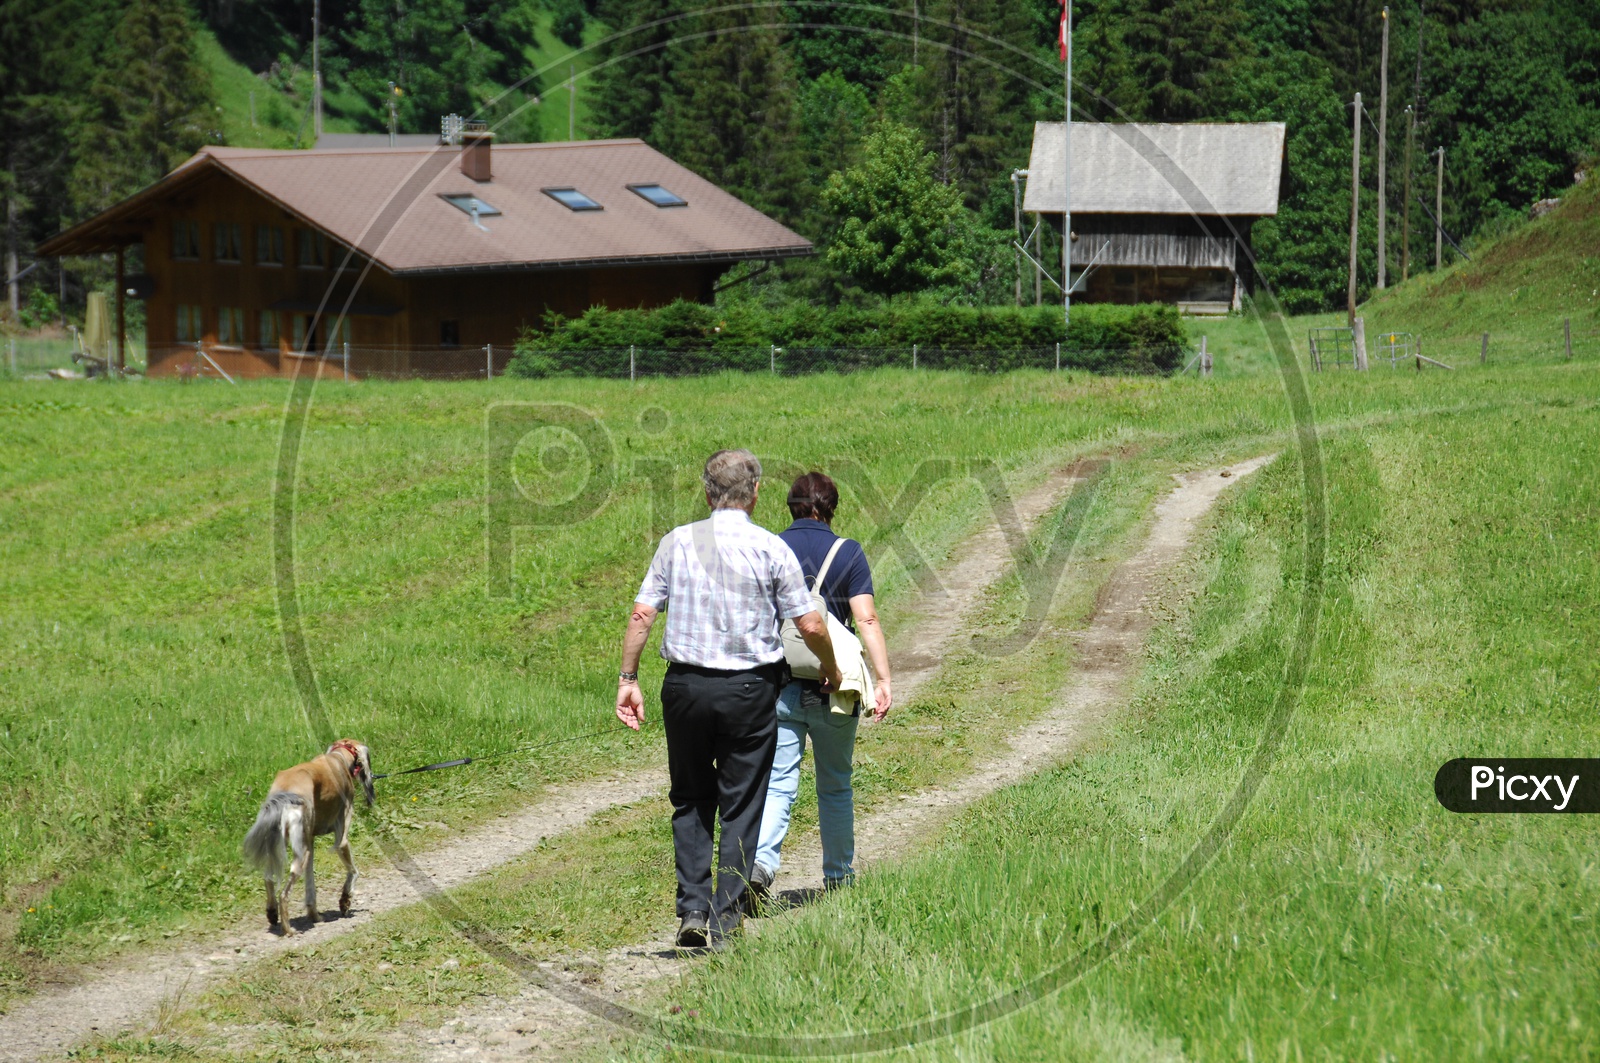 A Couple Walking on a Pathway With Greenery All Around Them